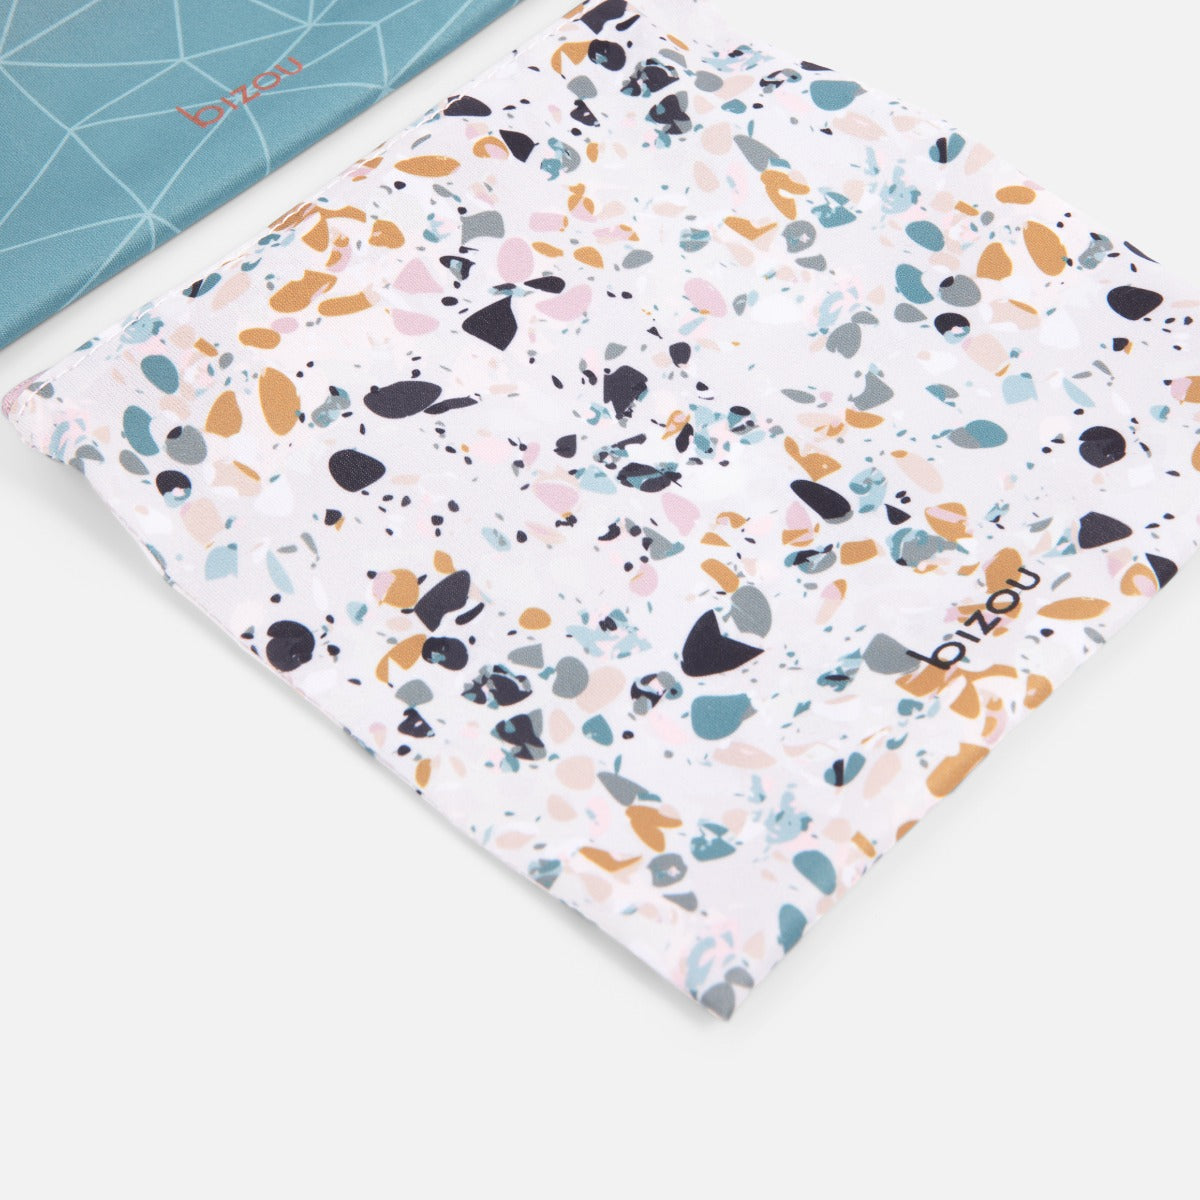 Blue duo of reusable nylon snack bags with terrazzo effect